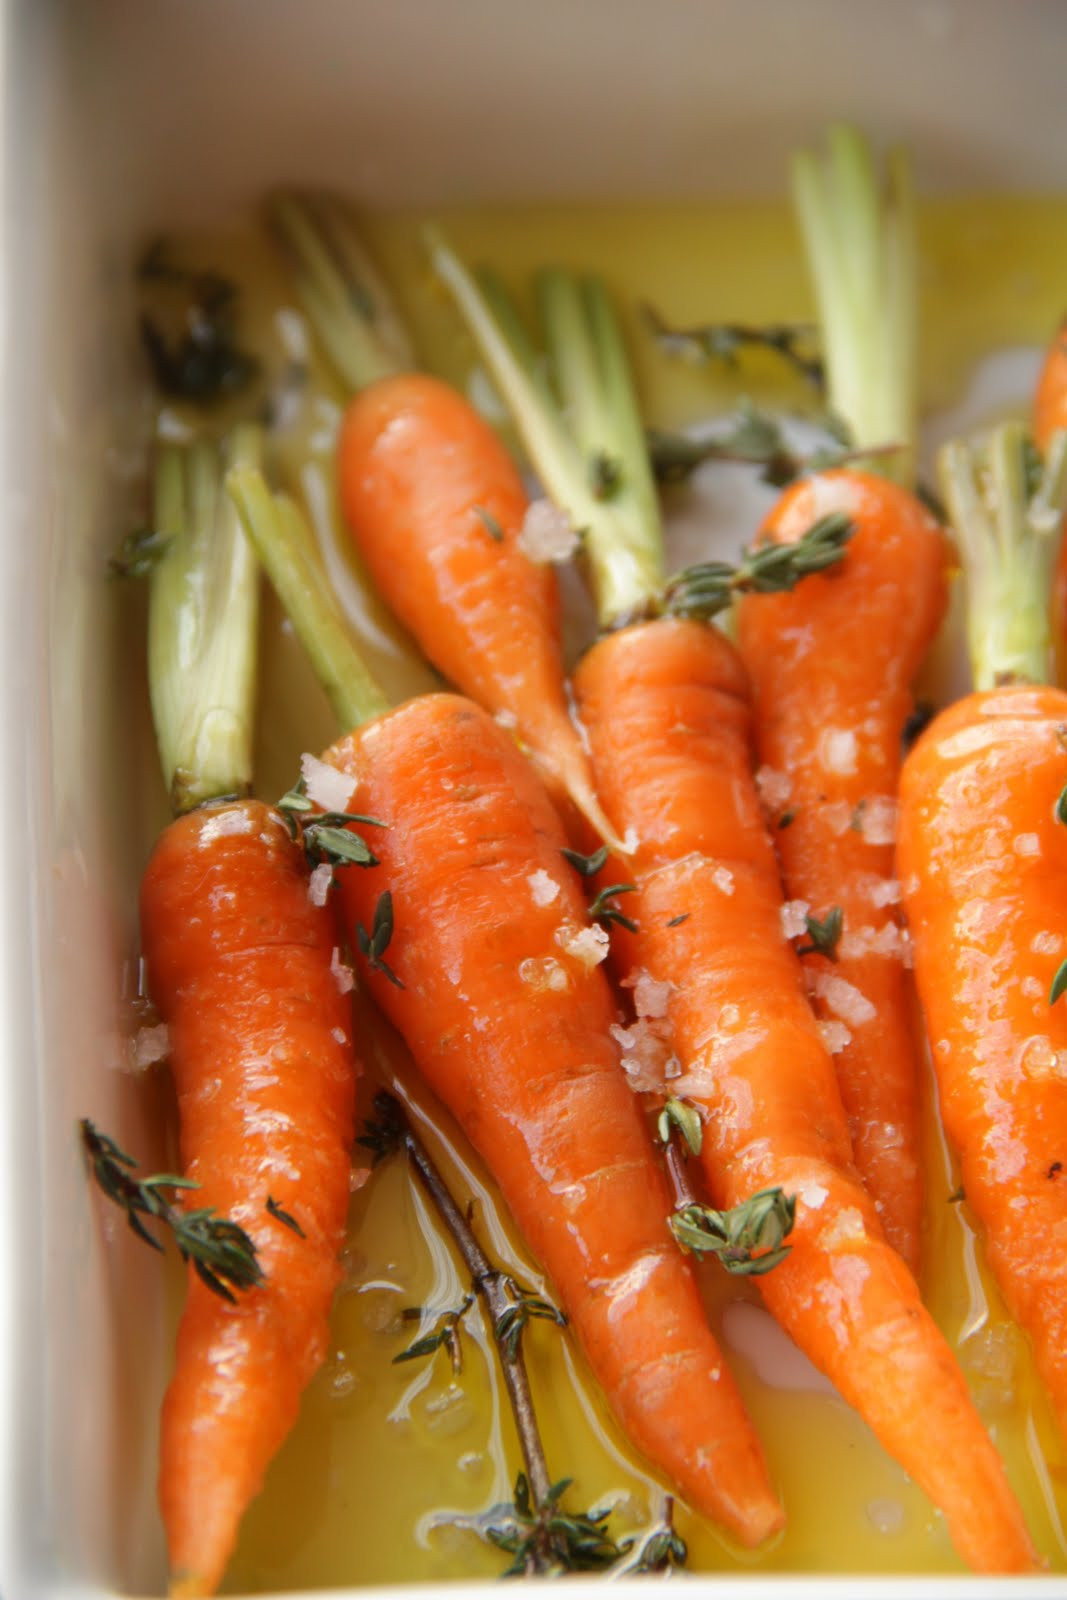 Roasted Baby Carrot Recipes
 Roasted Baby Carrots with Sea Salt and Thyme